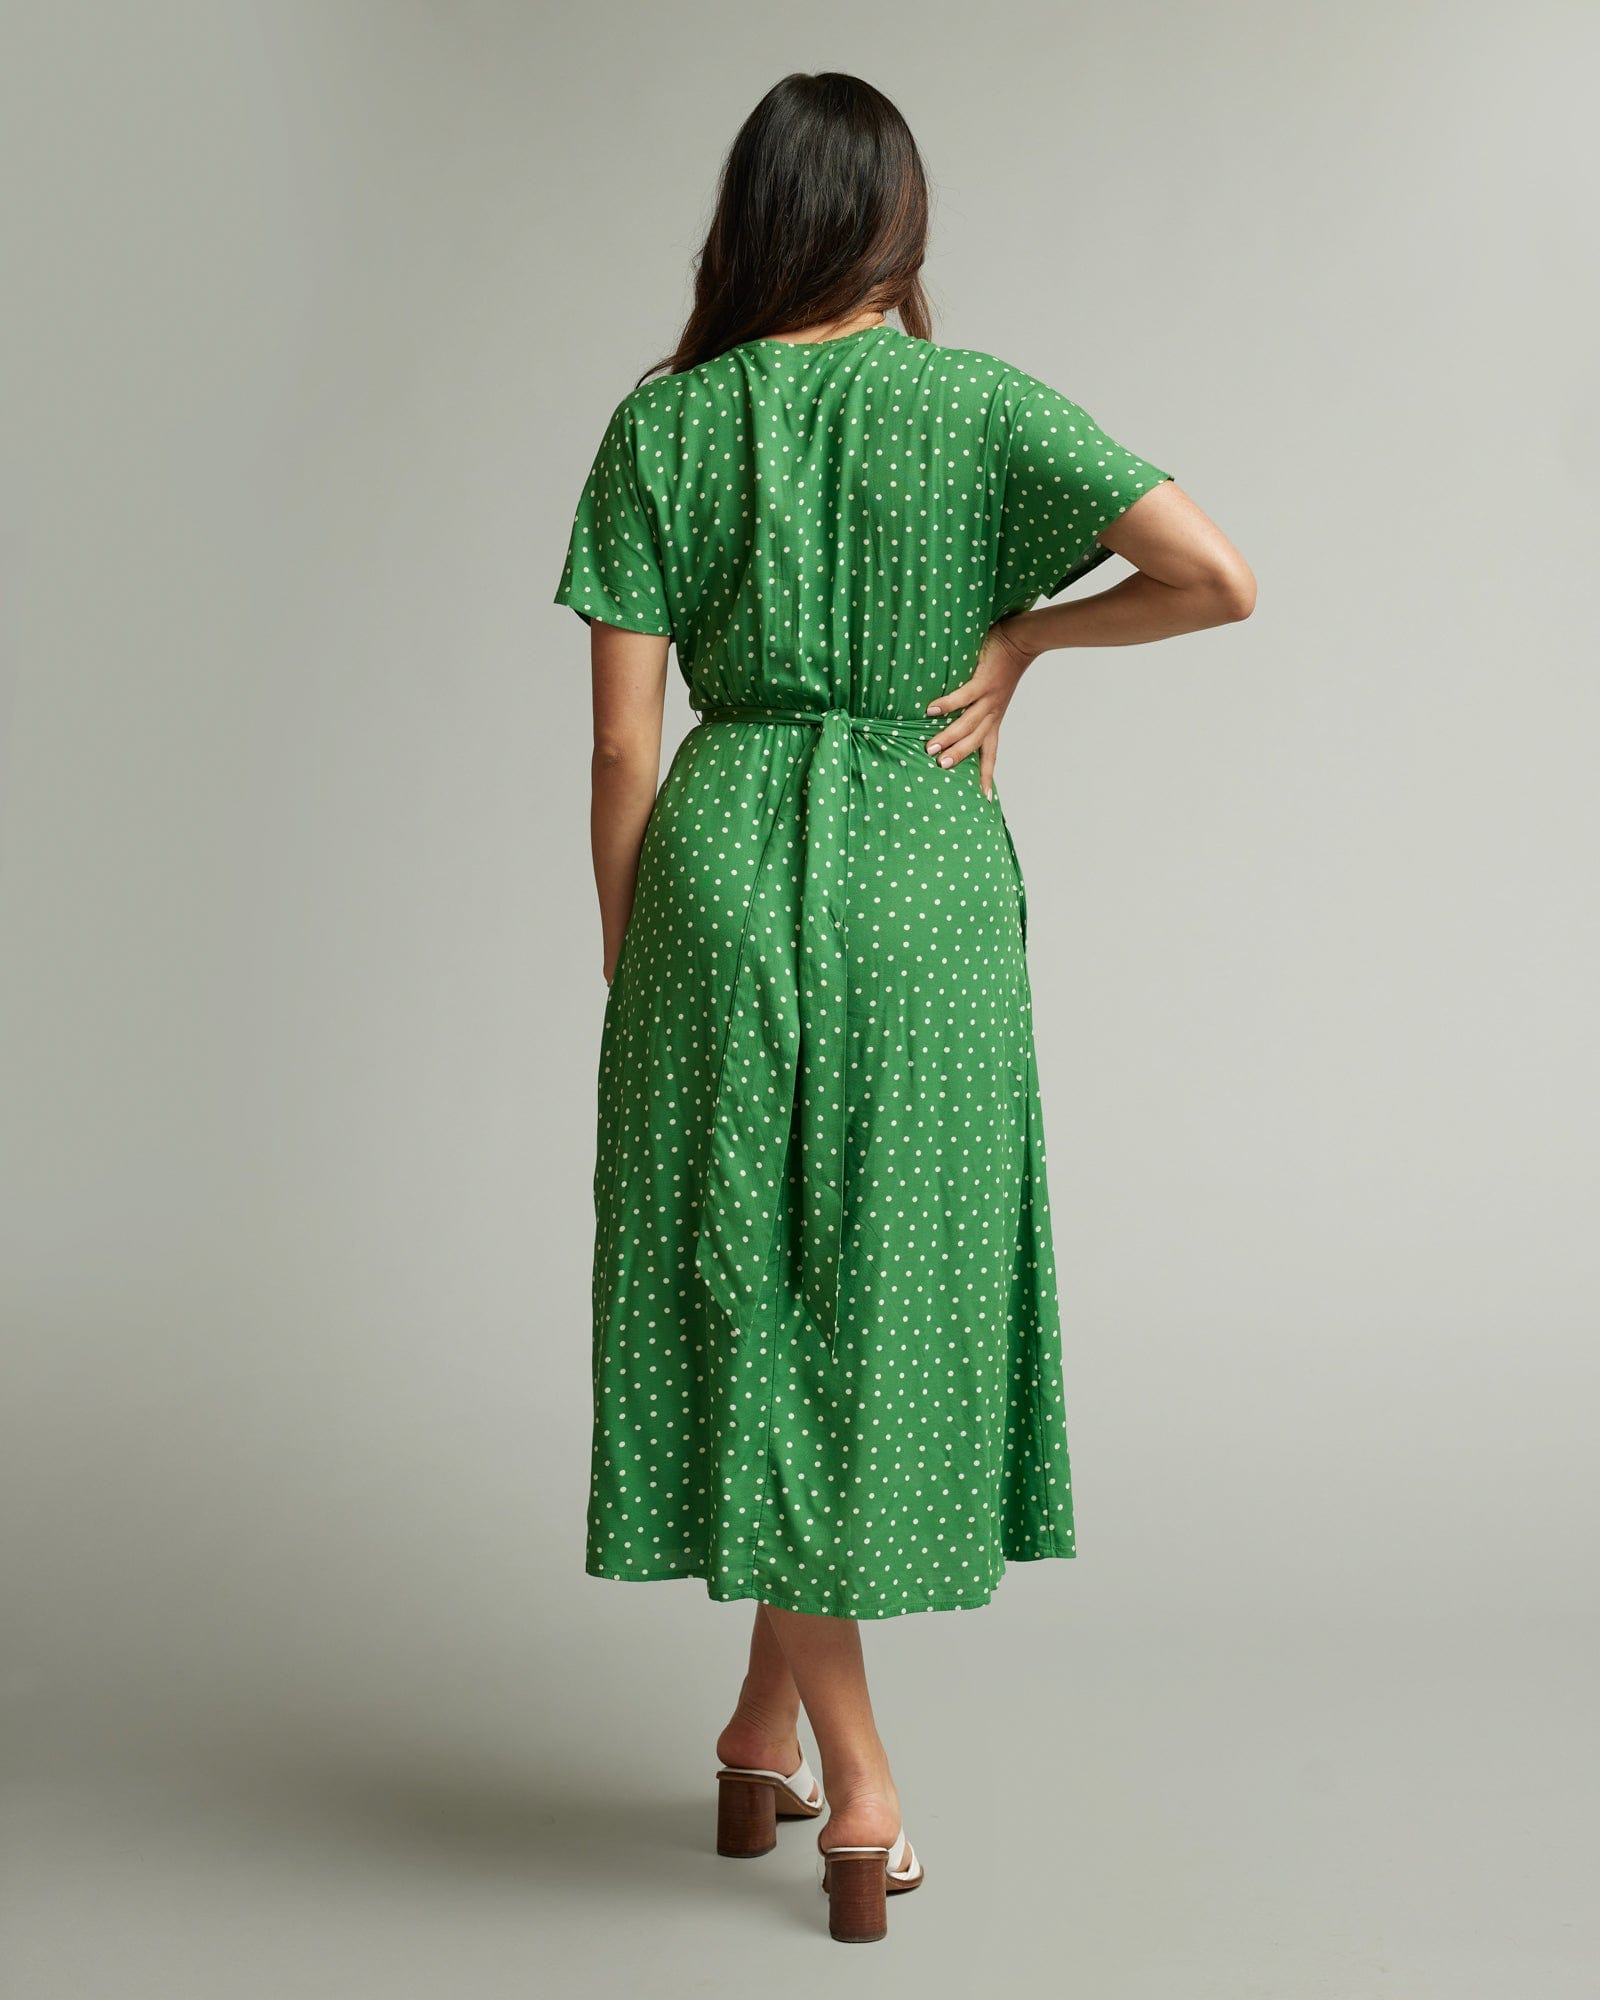 Woman in a short sleeve, midi-length, green with white polka dotted dress